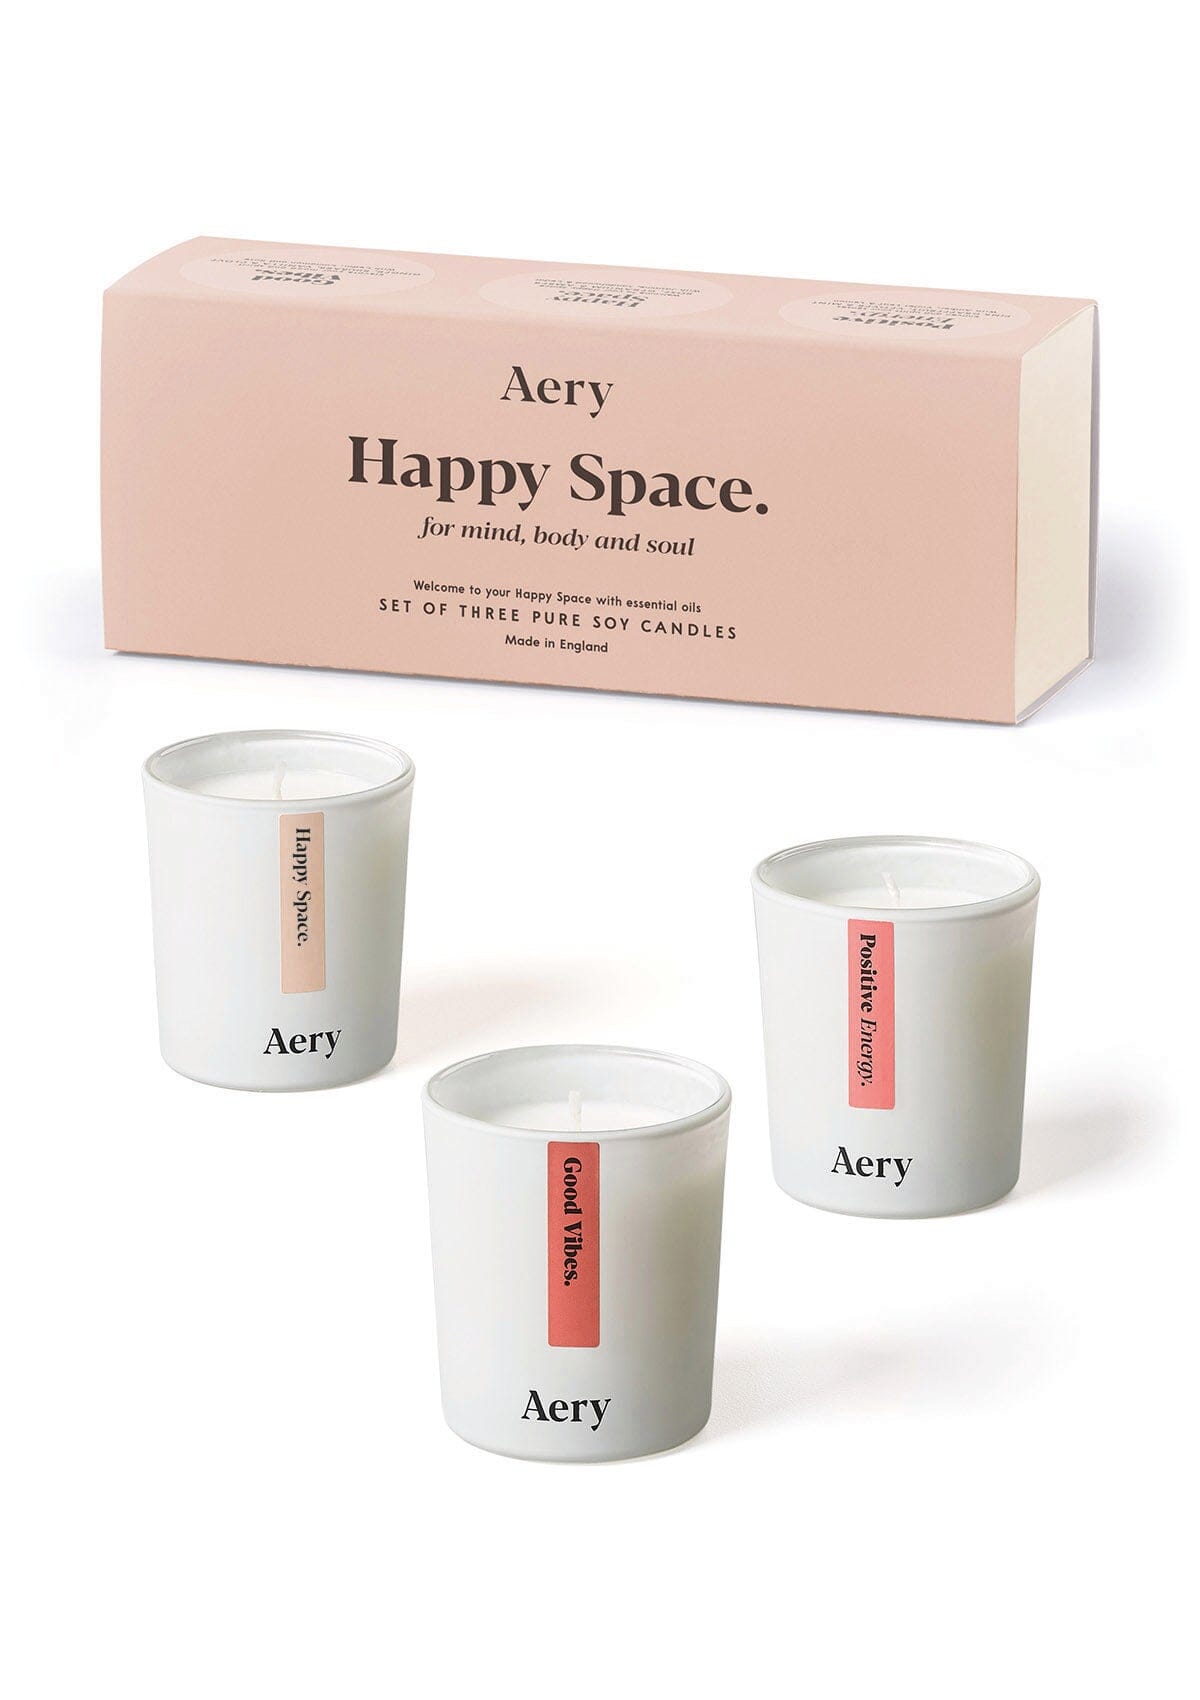 Pink Happy Space candle set of three by Aery displayed by product packaging on white background